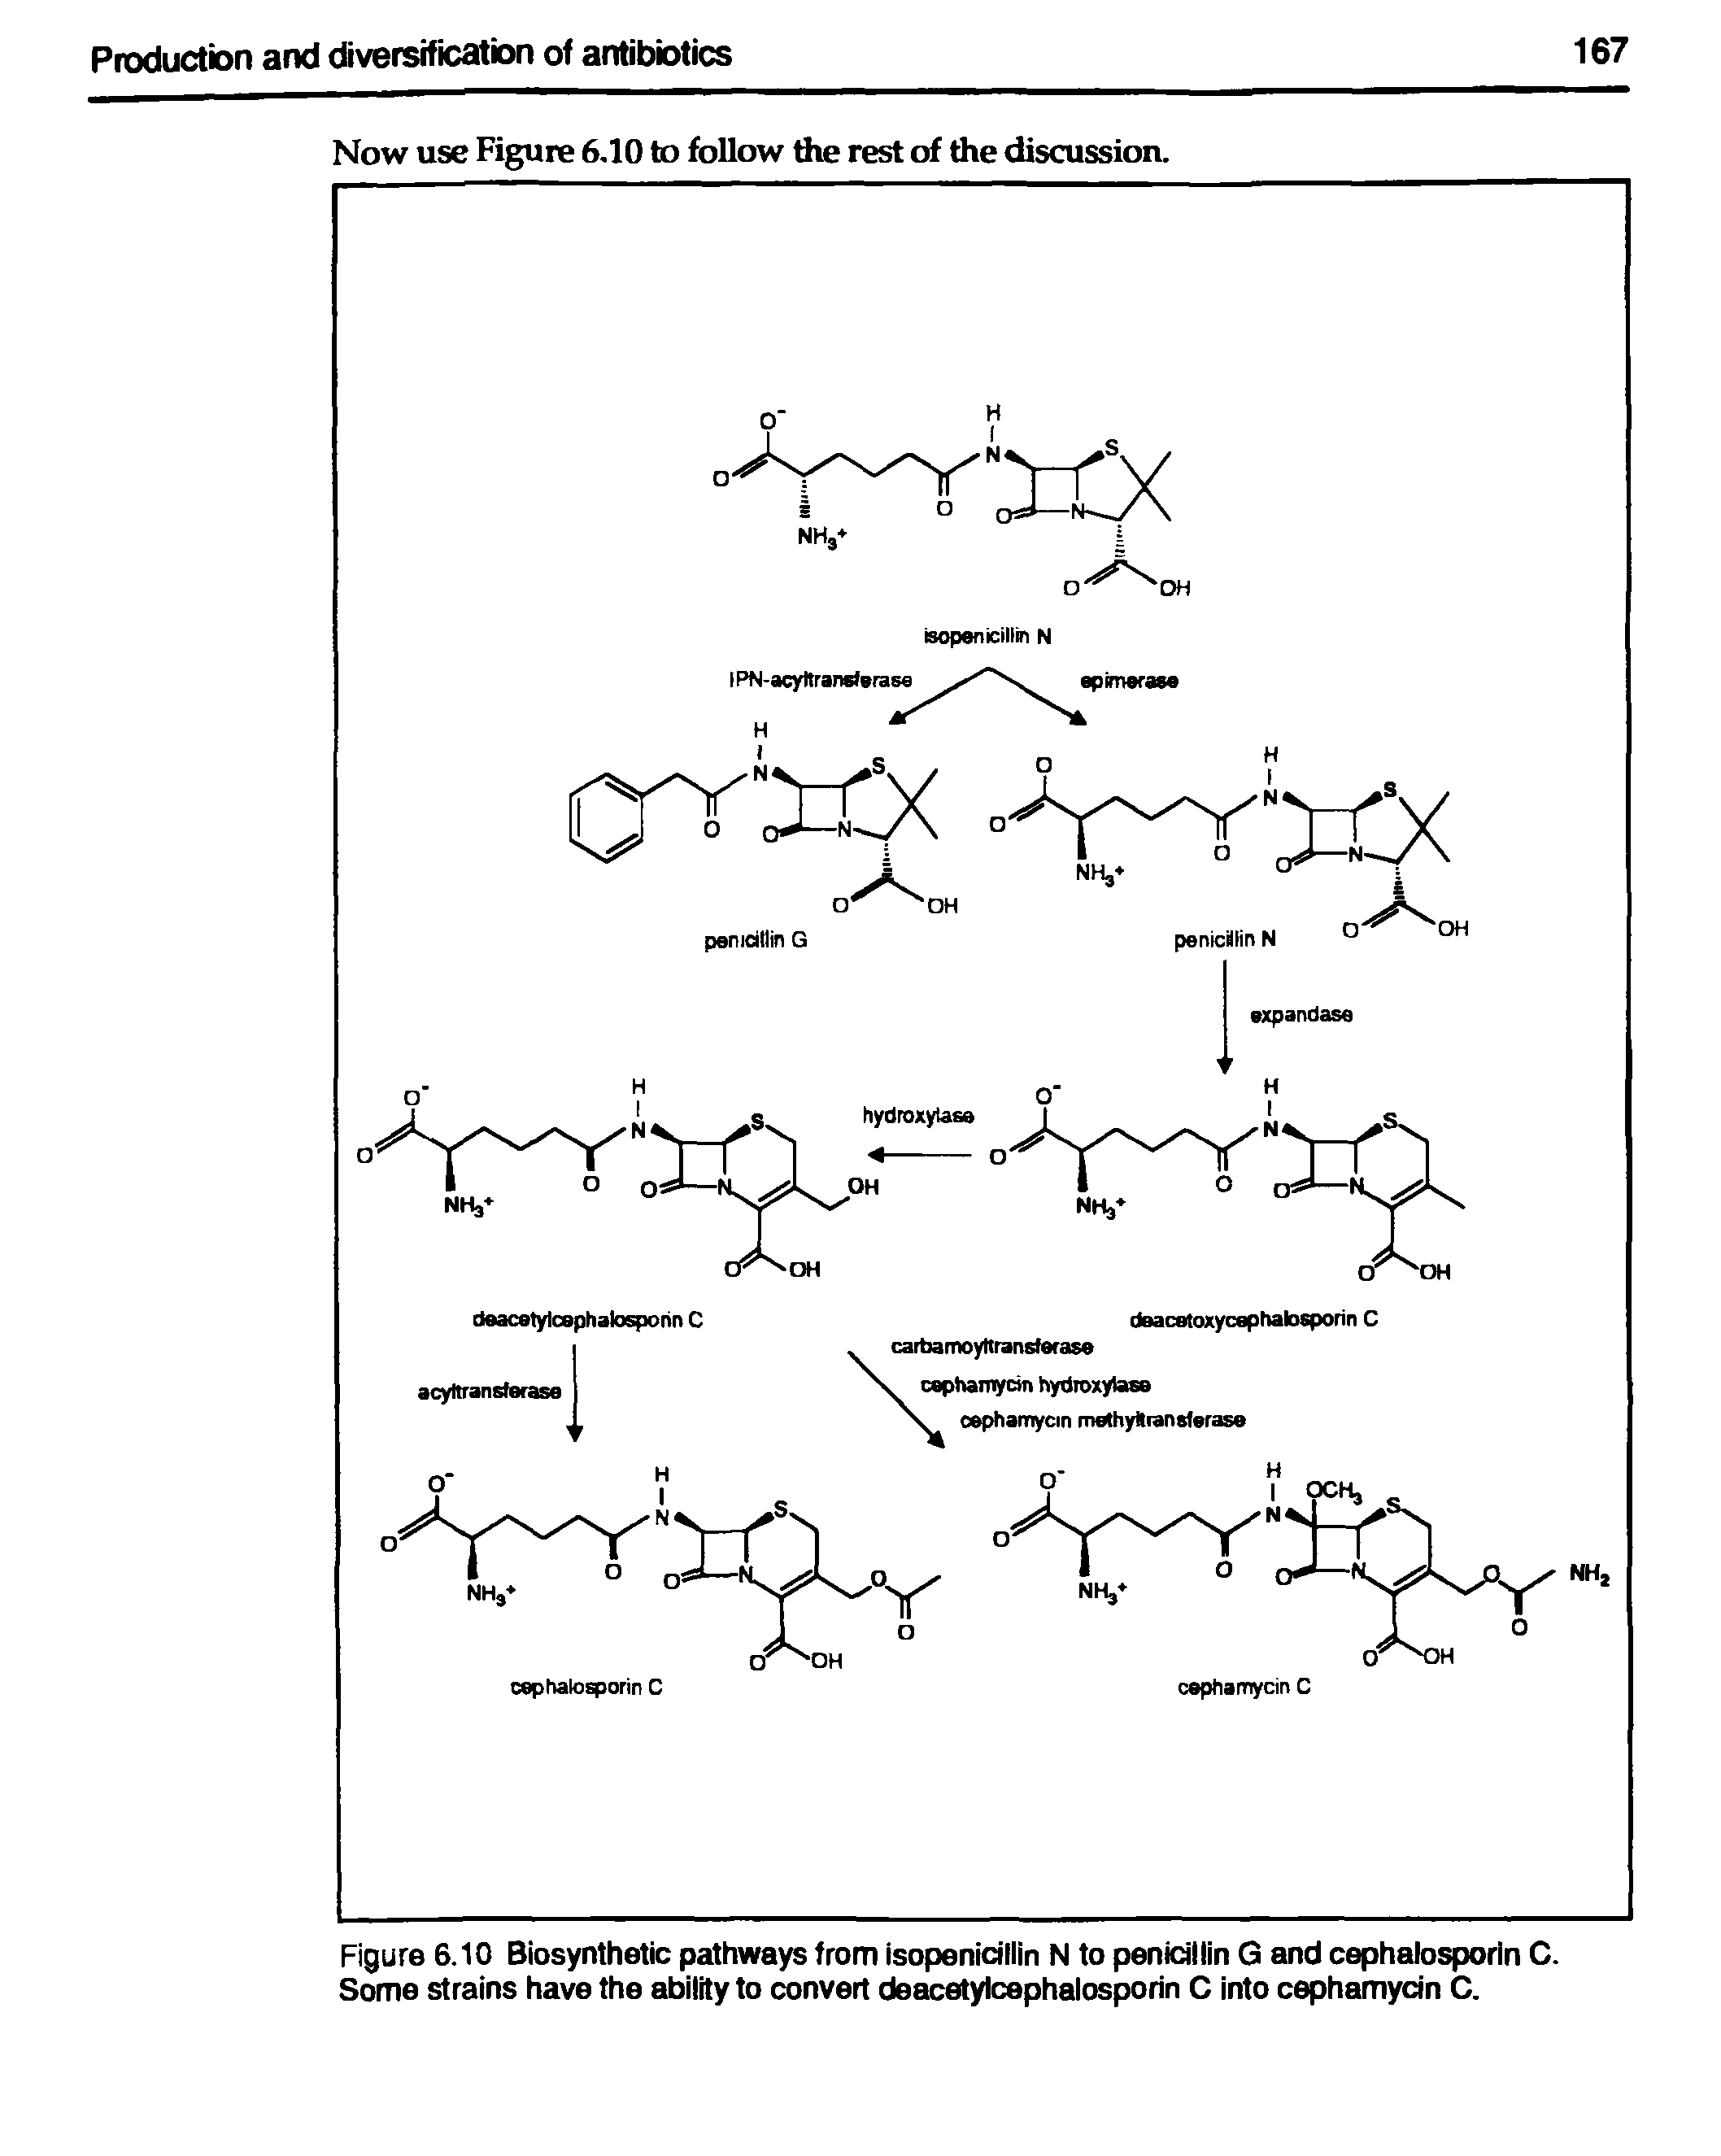 Figure 6.10 Biosynthetic pathways from isopenicillin N to penicillin G and cephalosporin C. Some strains have the ability to convert deacetylcephalosporin C into cephamycin C.